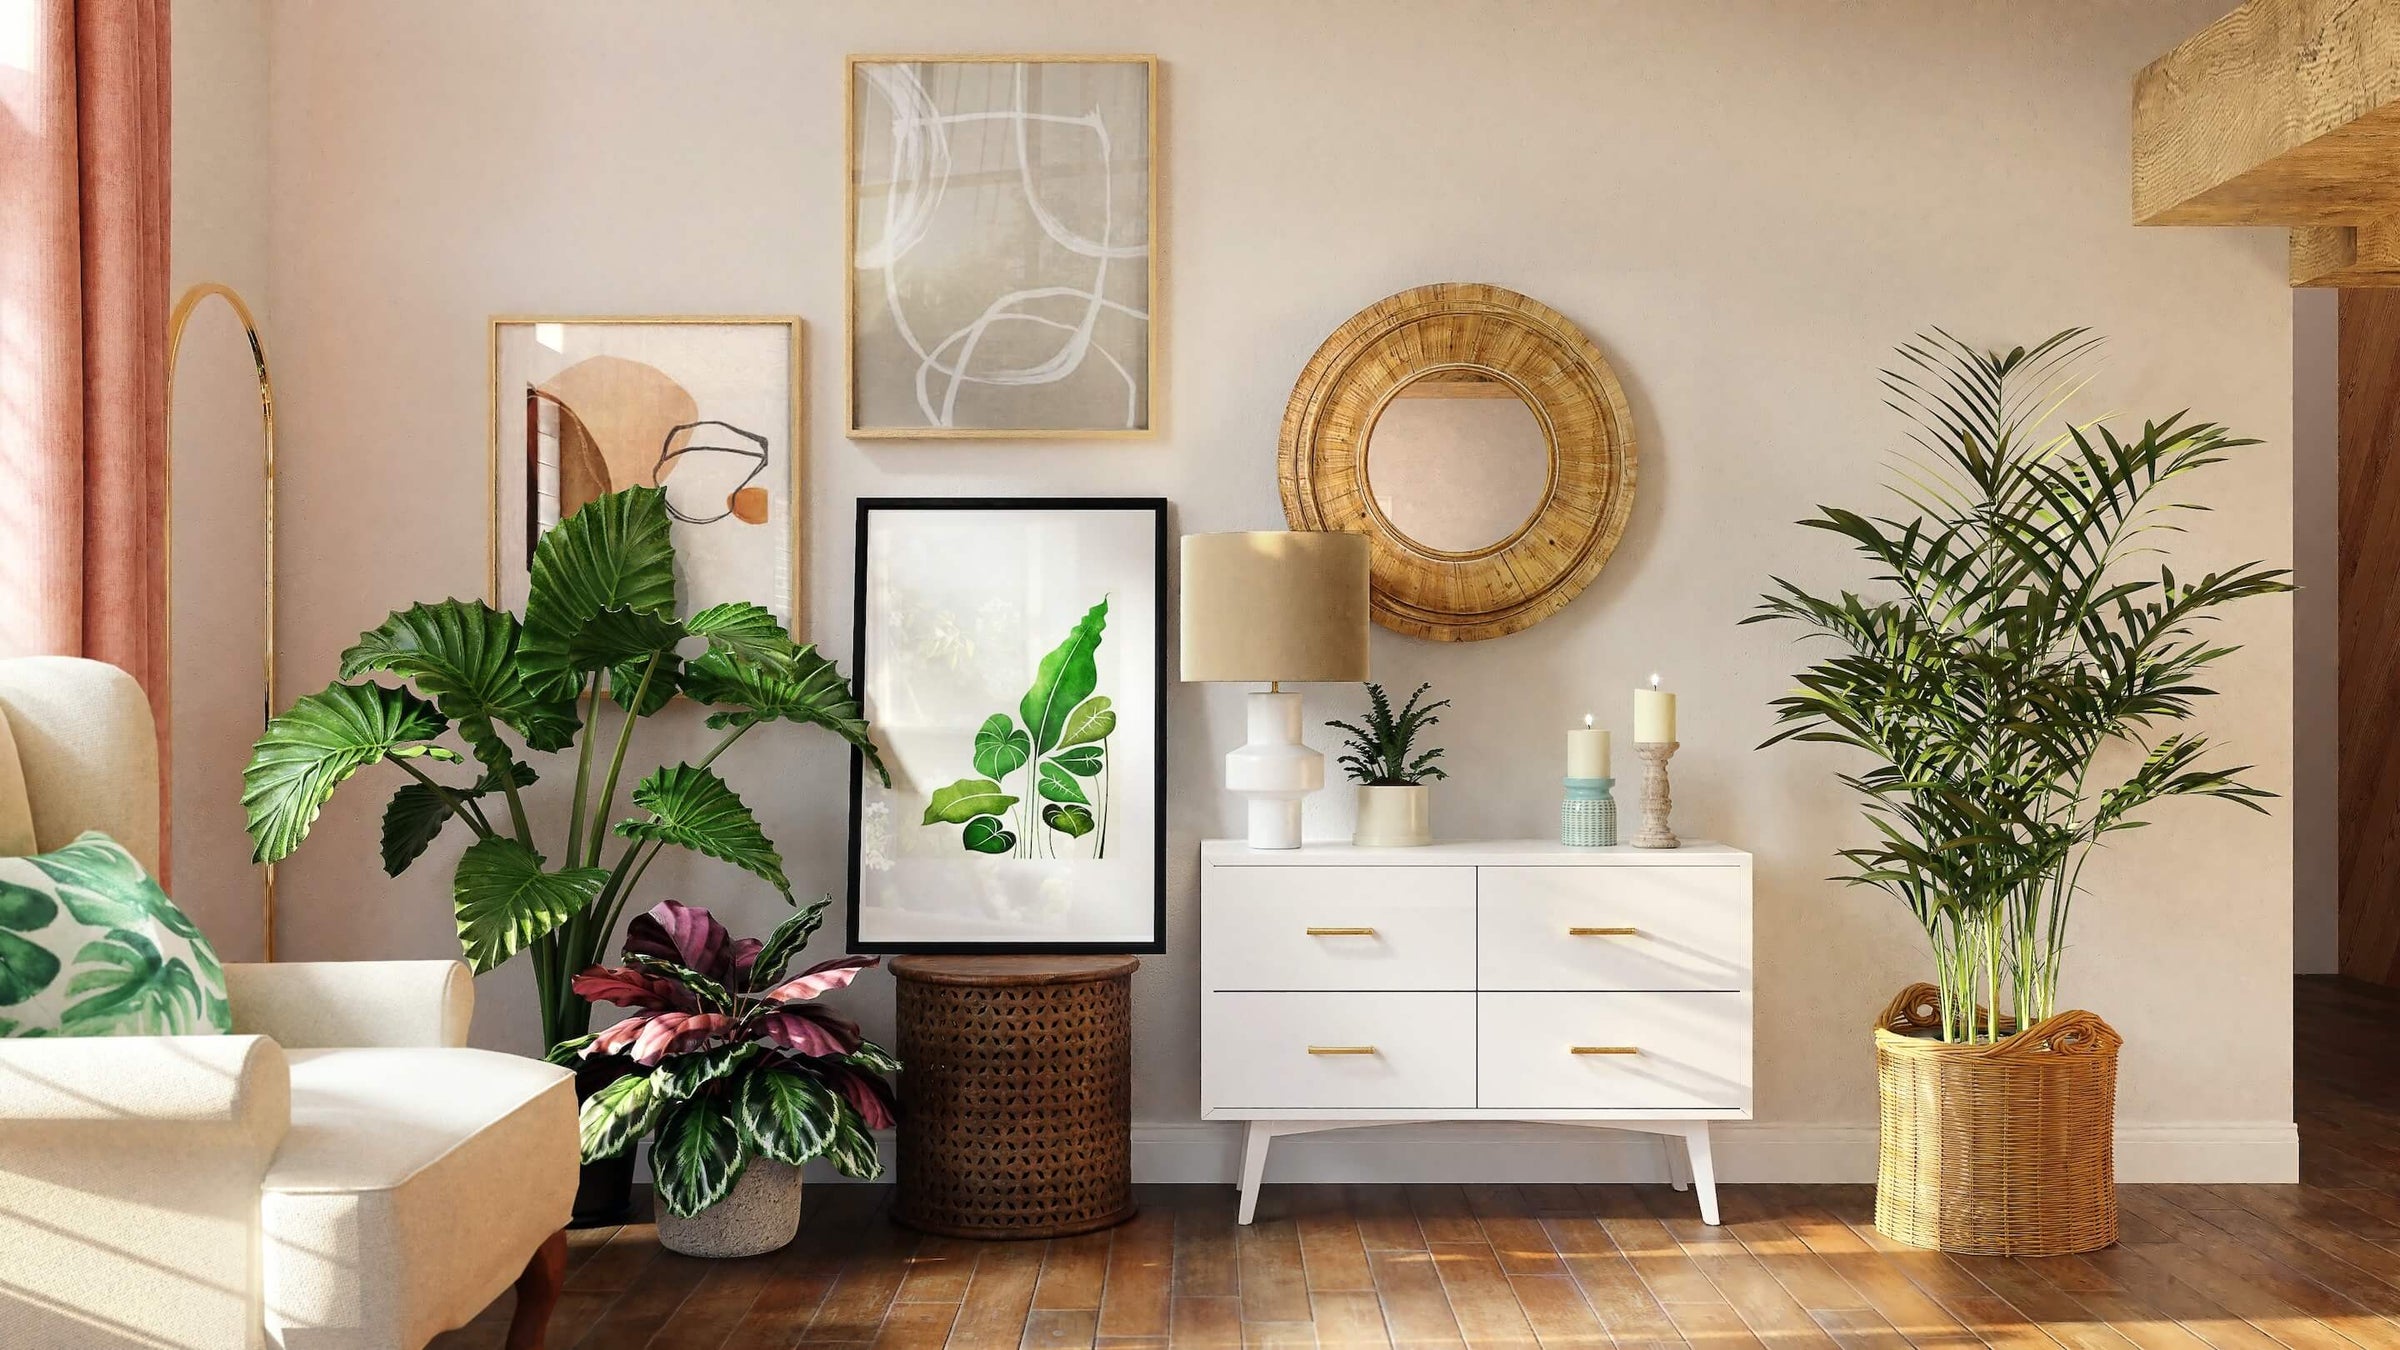 Sunny living room filled with houseplants and artwork